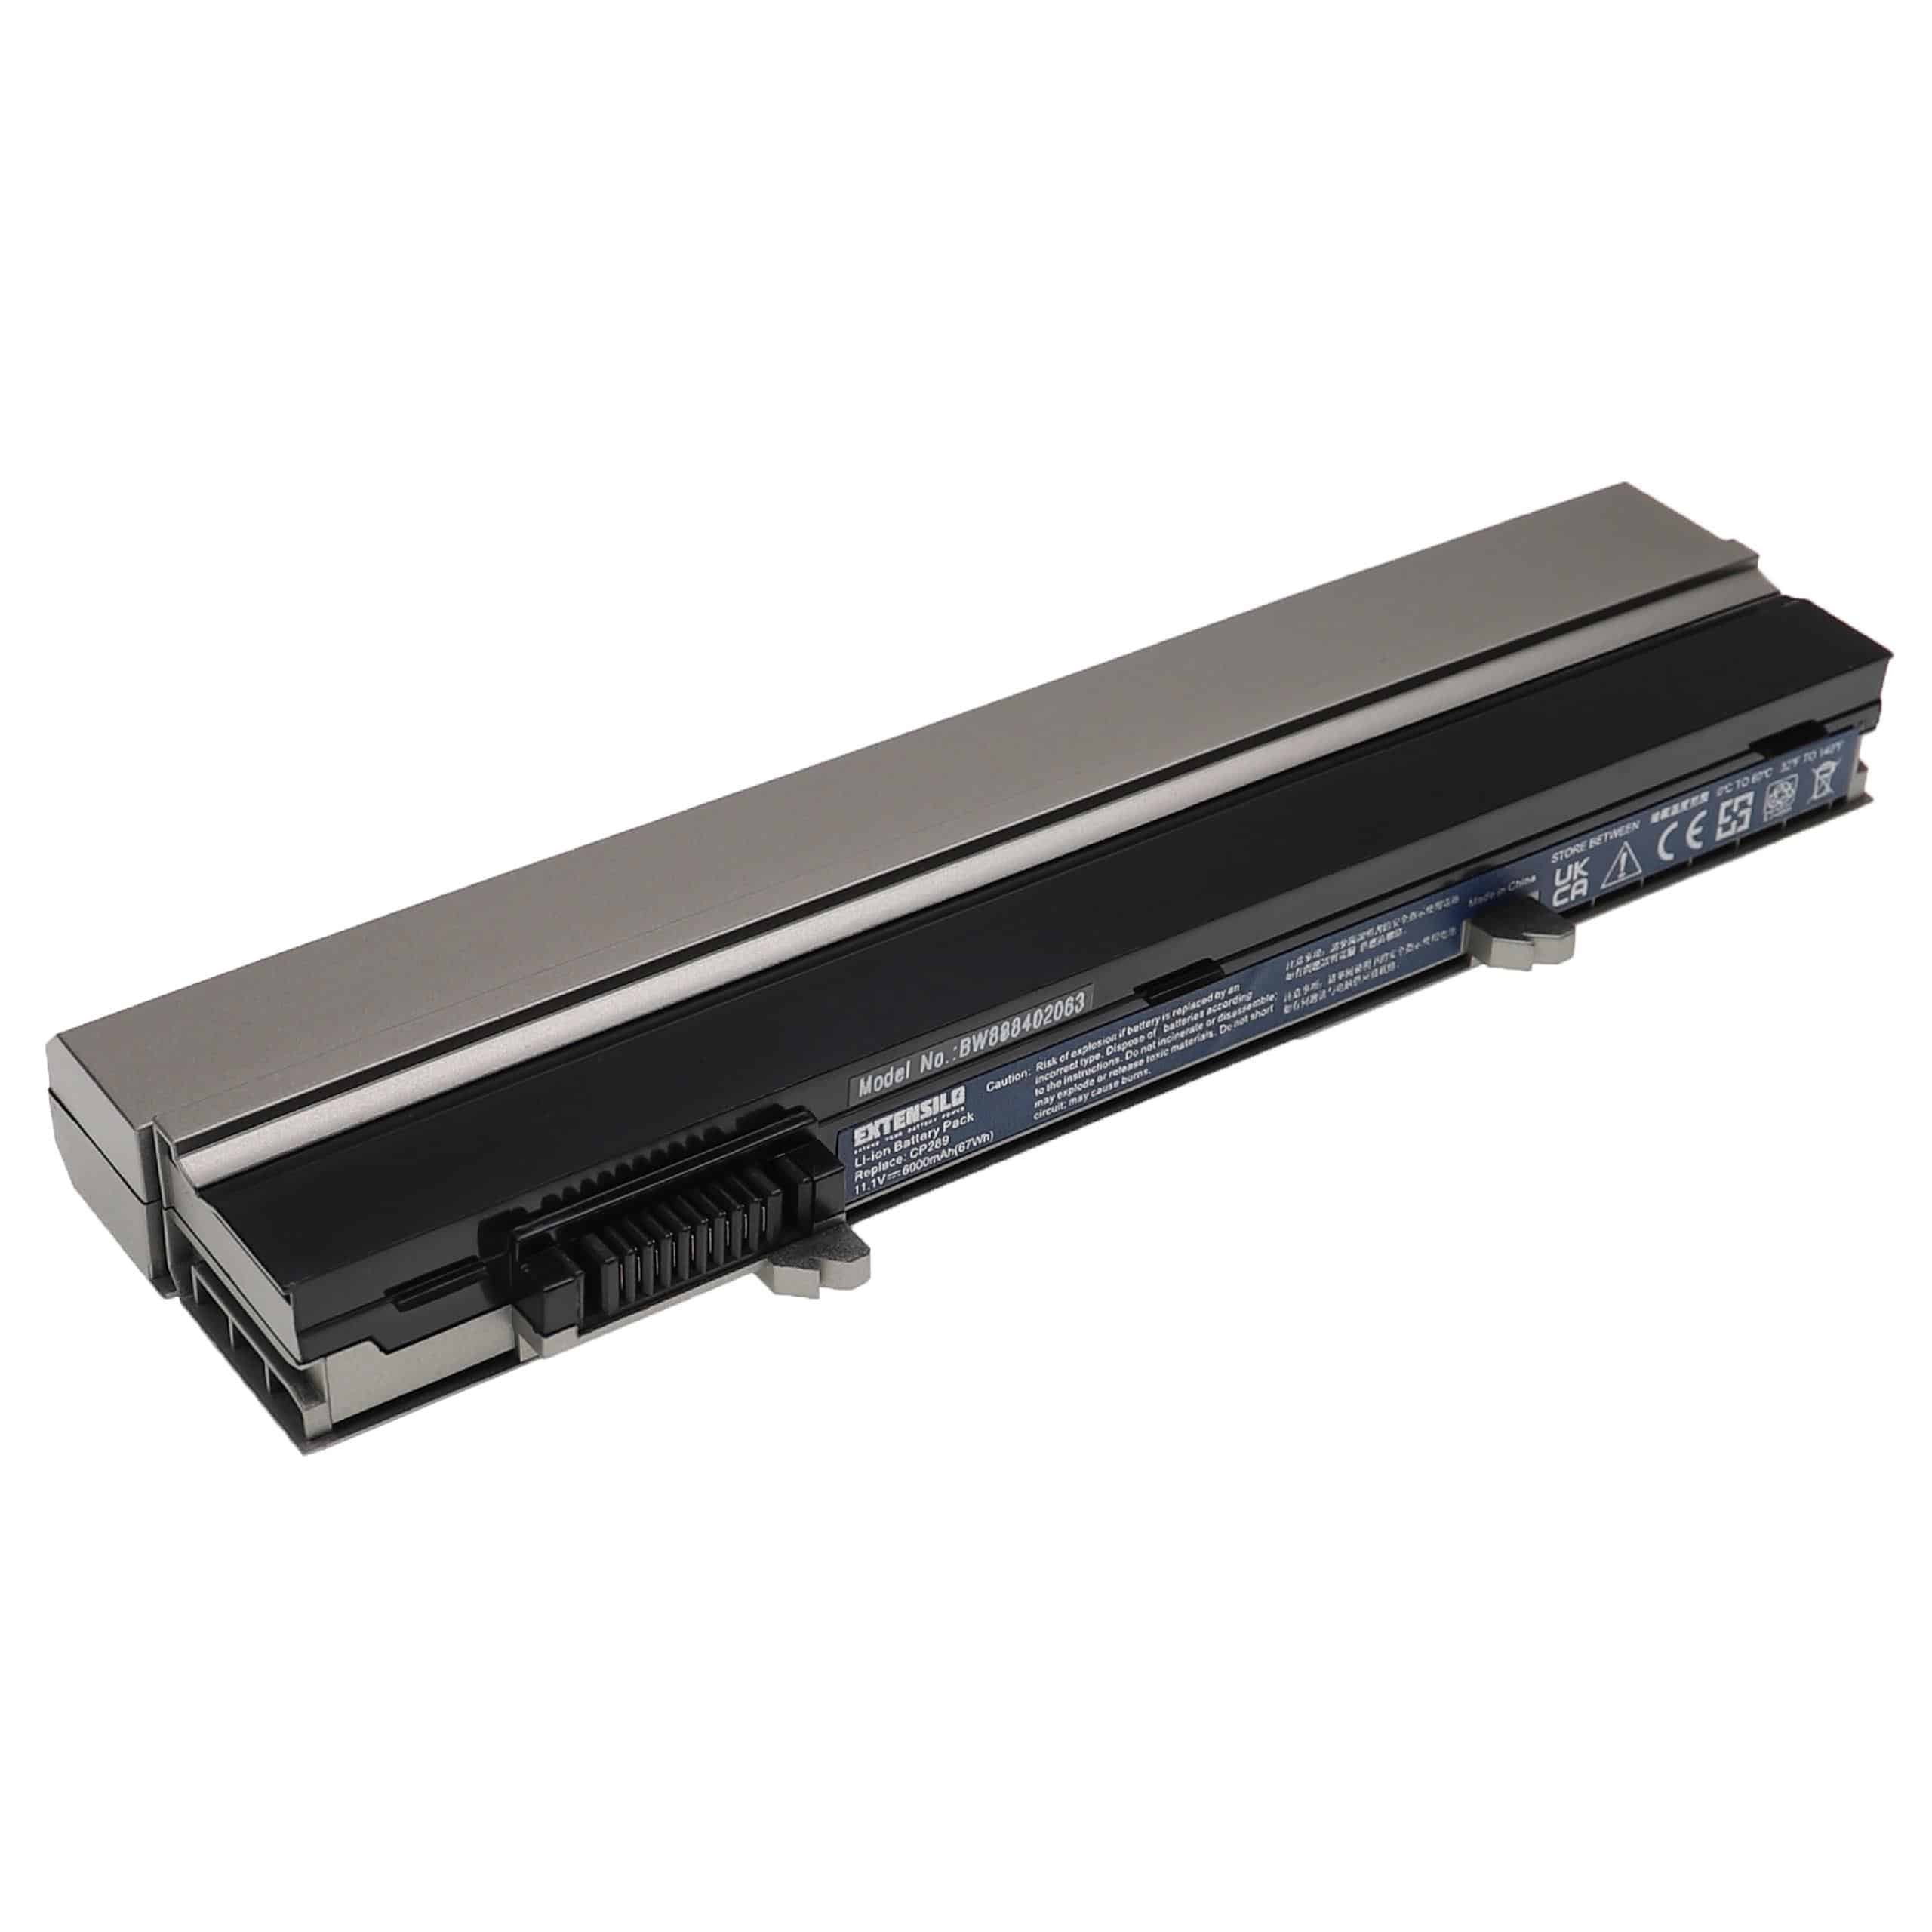 Notebook Battery Replacement for Dell 0FX8X, 451-10636, 312-9955, 312-0823, 312-0822 - 6000mAh 11.1V Li-Ion